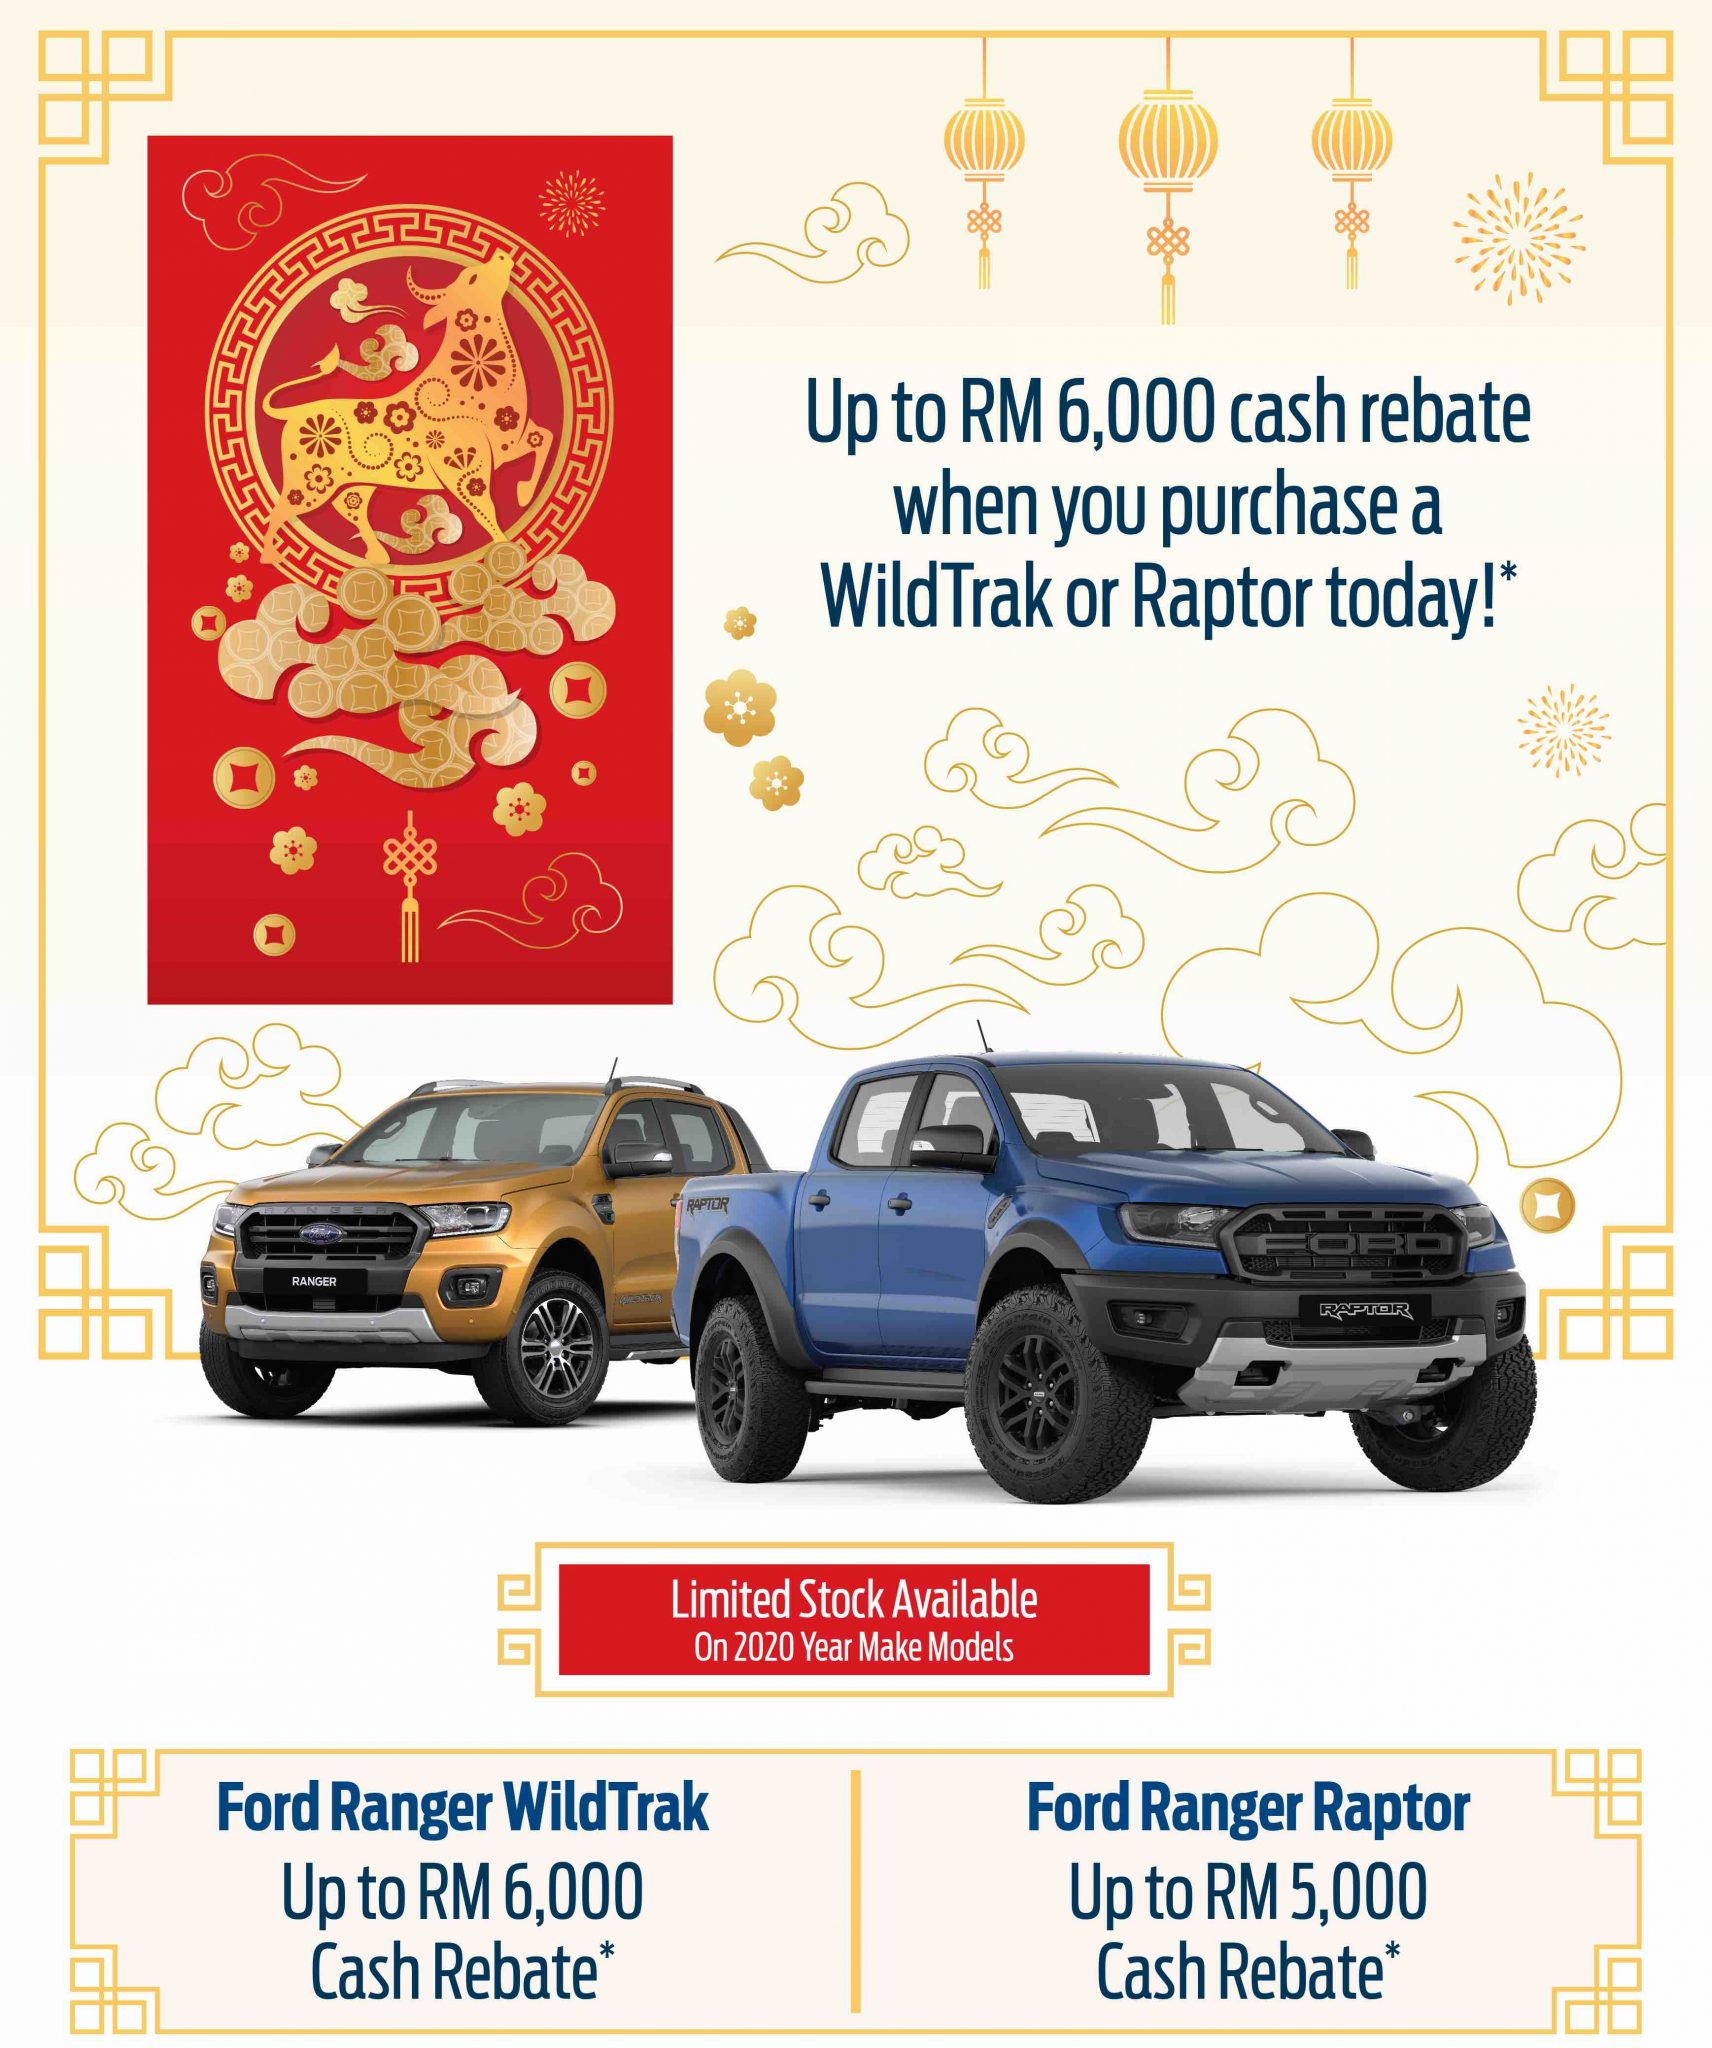 sdac-ford-offers-exciting-cash-rebates-on-ranger-raptor-and-wildtrak